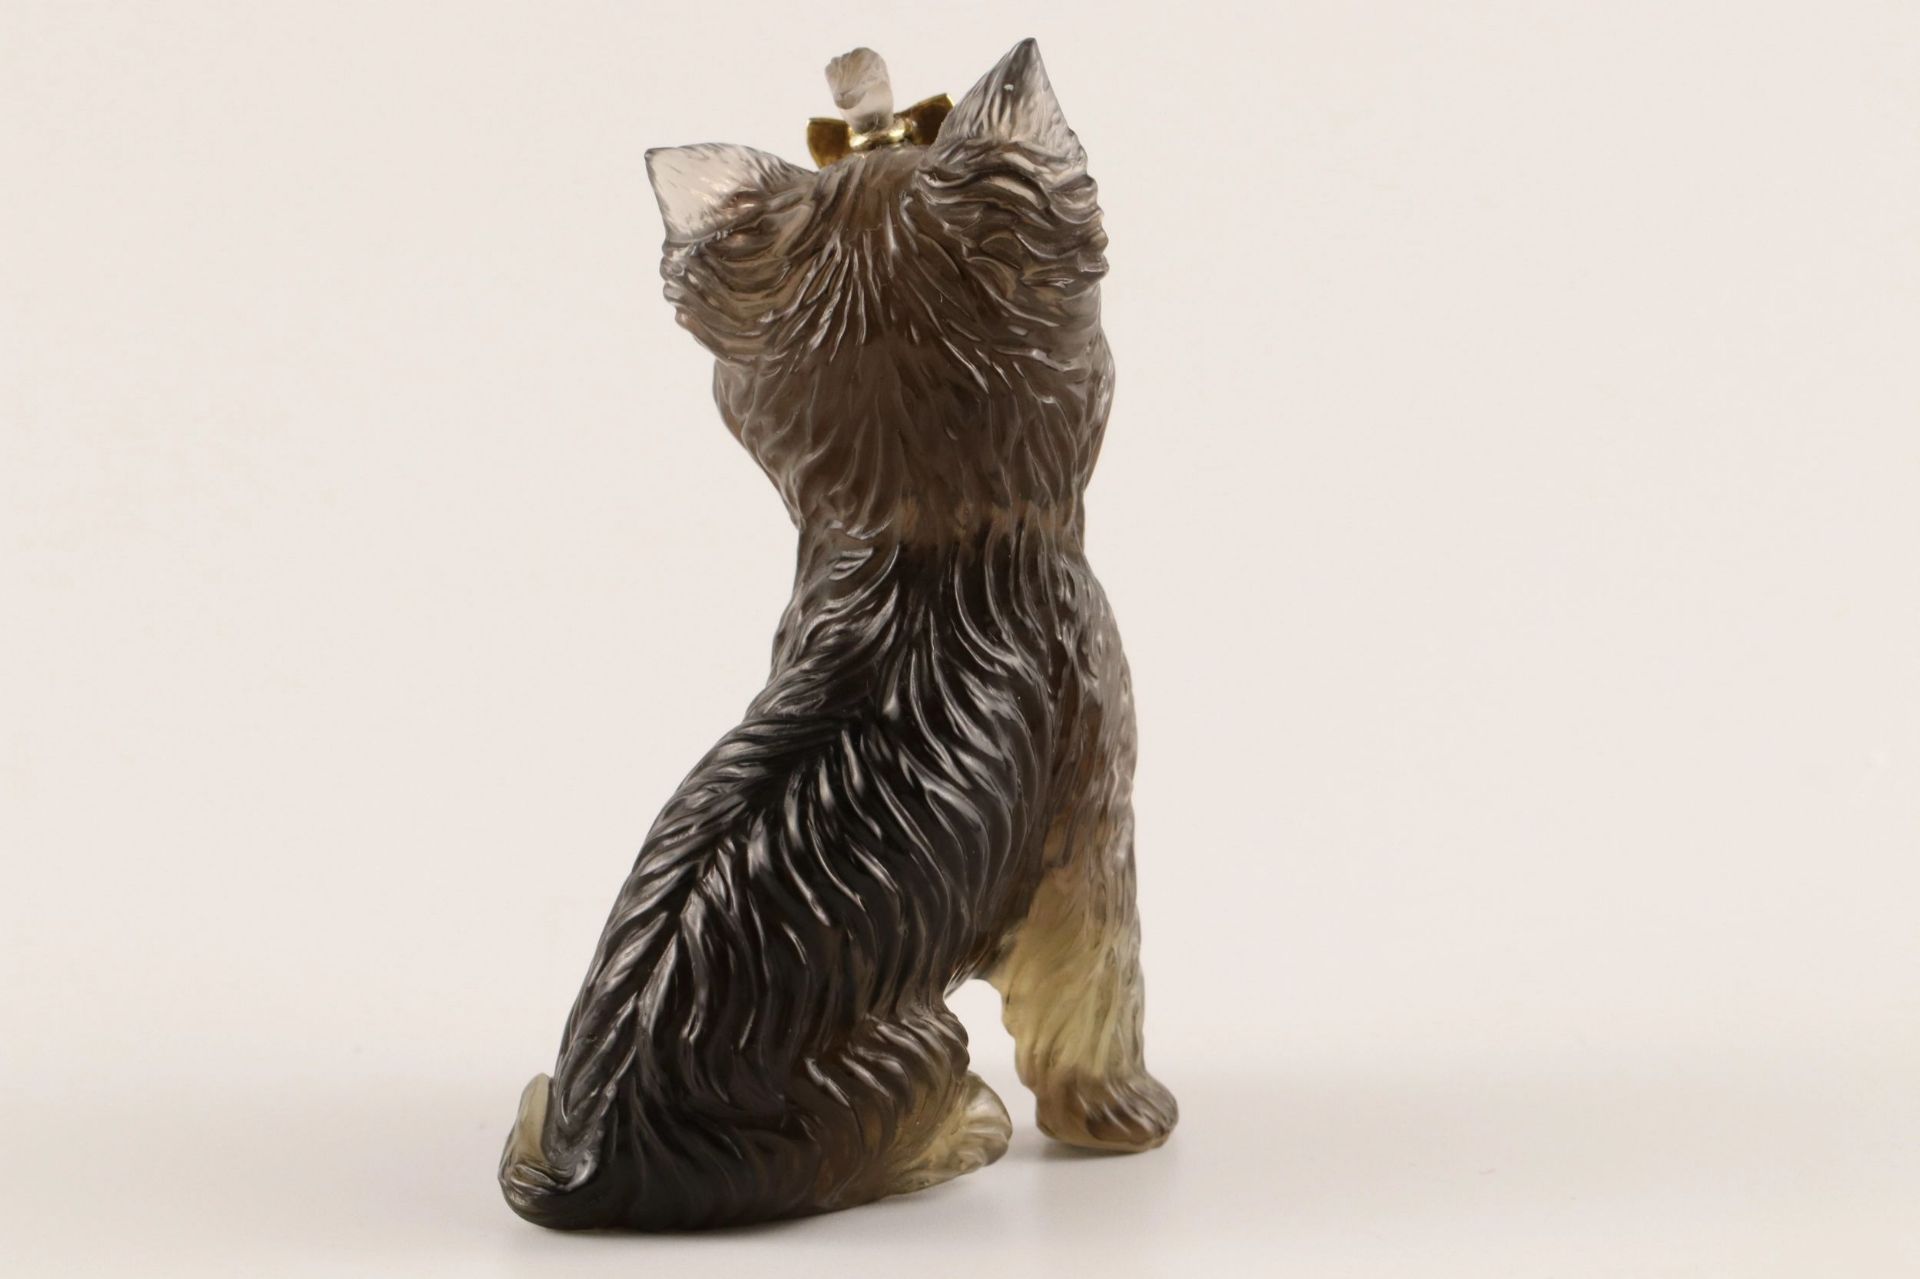 Stone-cut figurine Yorkshire Terrier in the style of Faberge 20th century. - Image 5 of 5